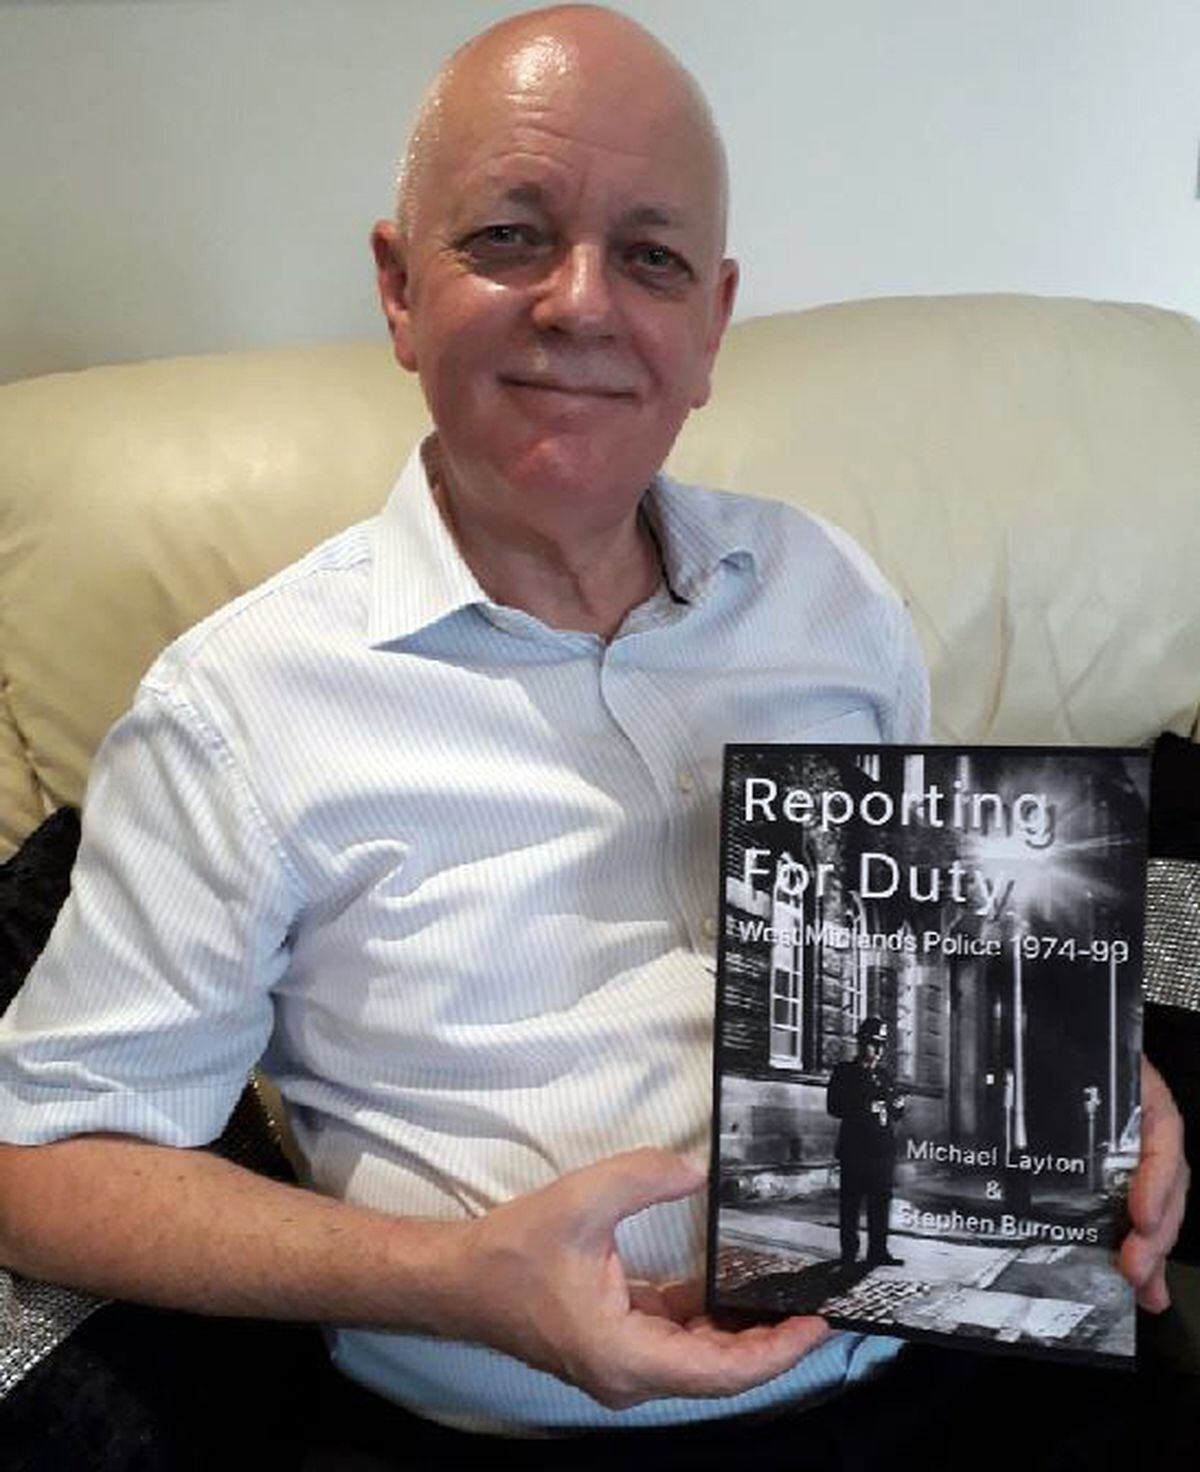 Mike Layton with his new book Reporting for Duty detailing his career at West Midlands Police